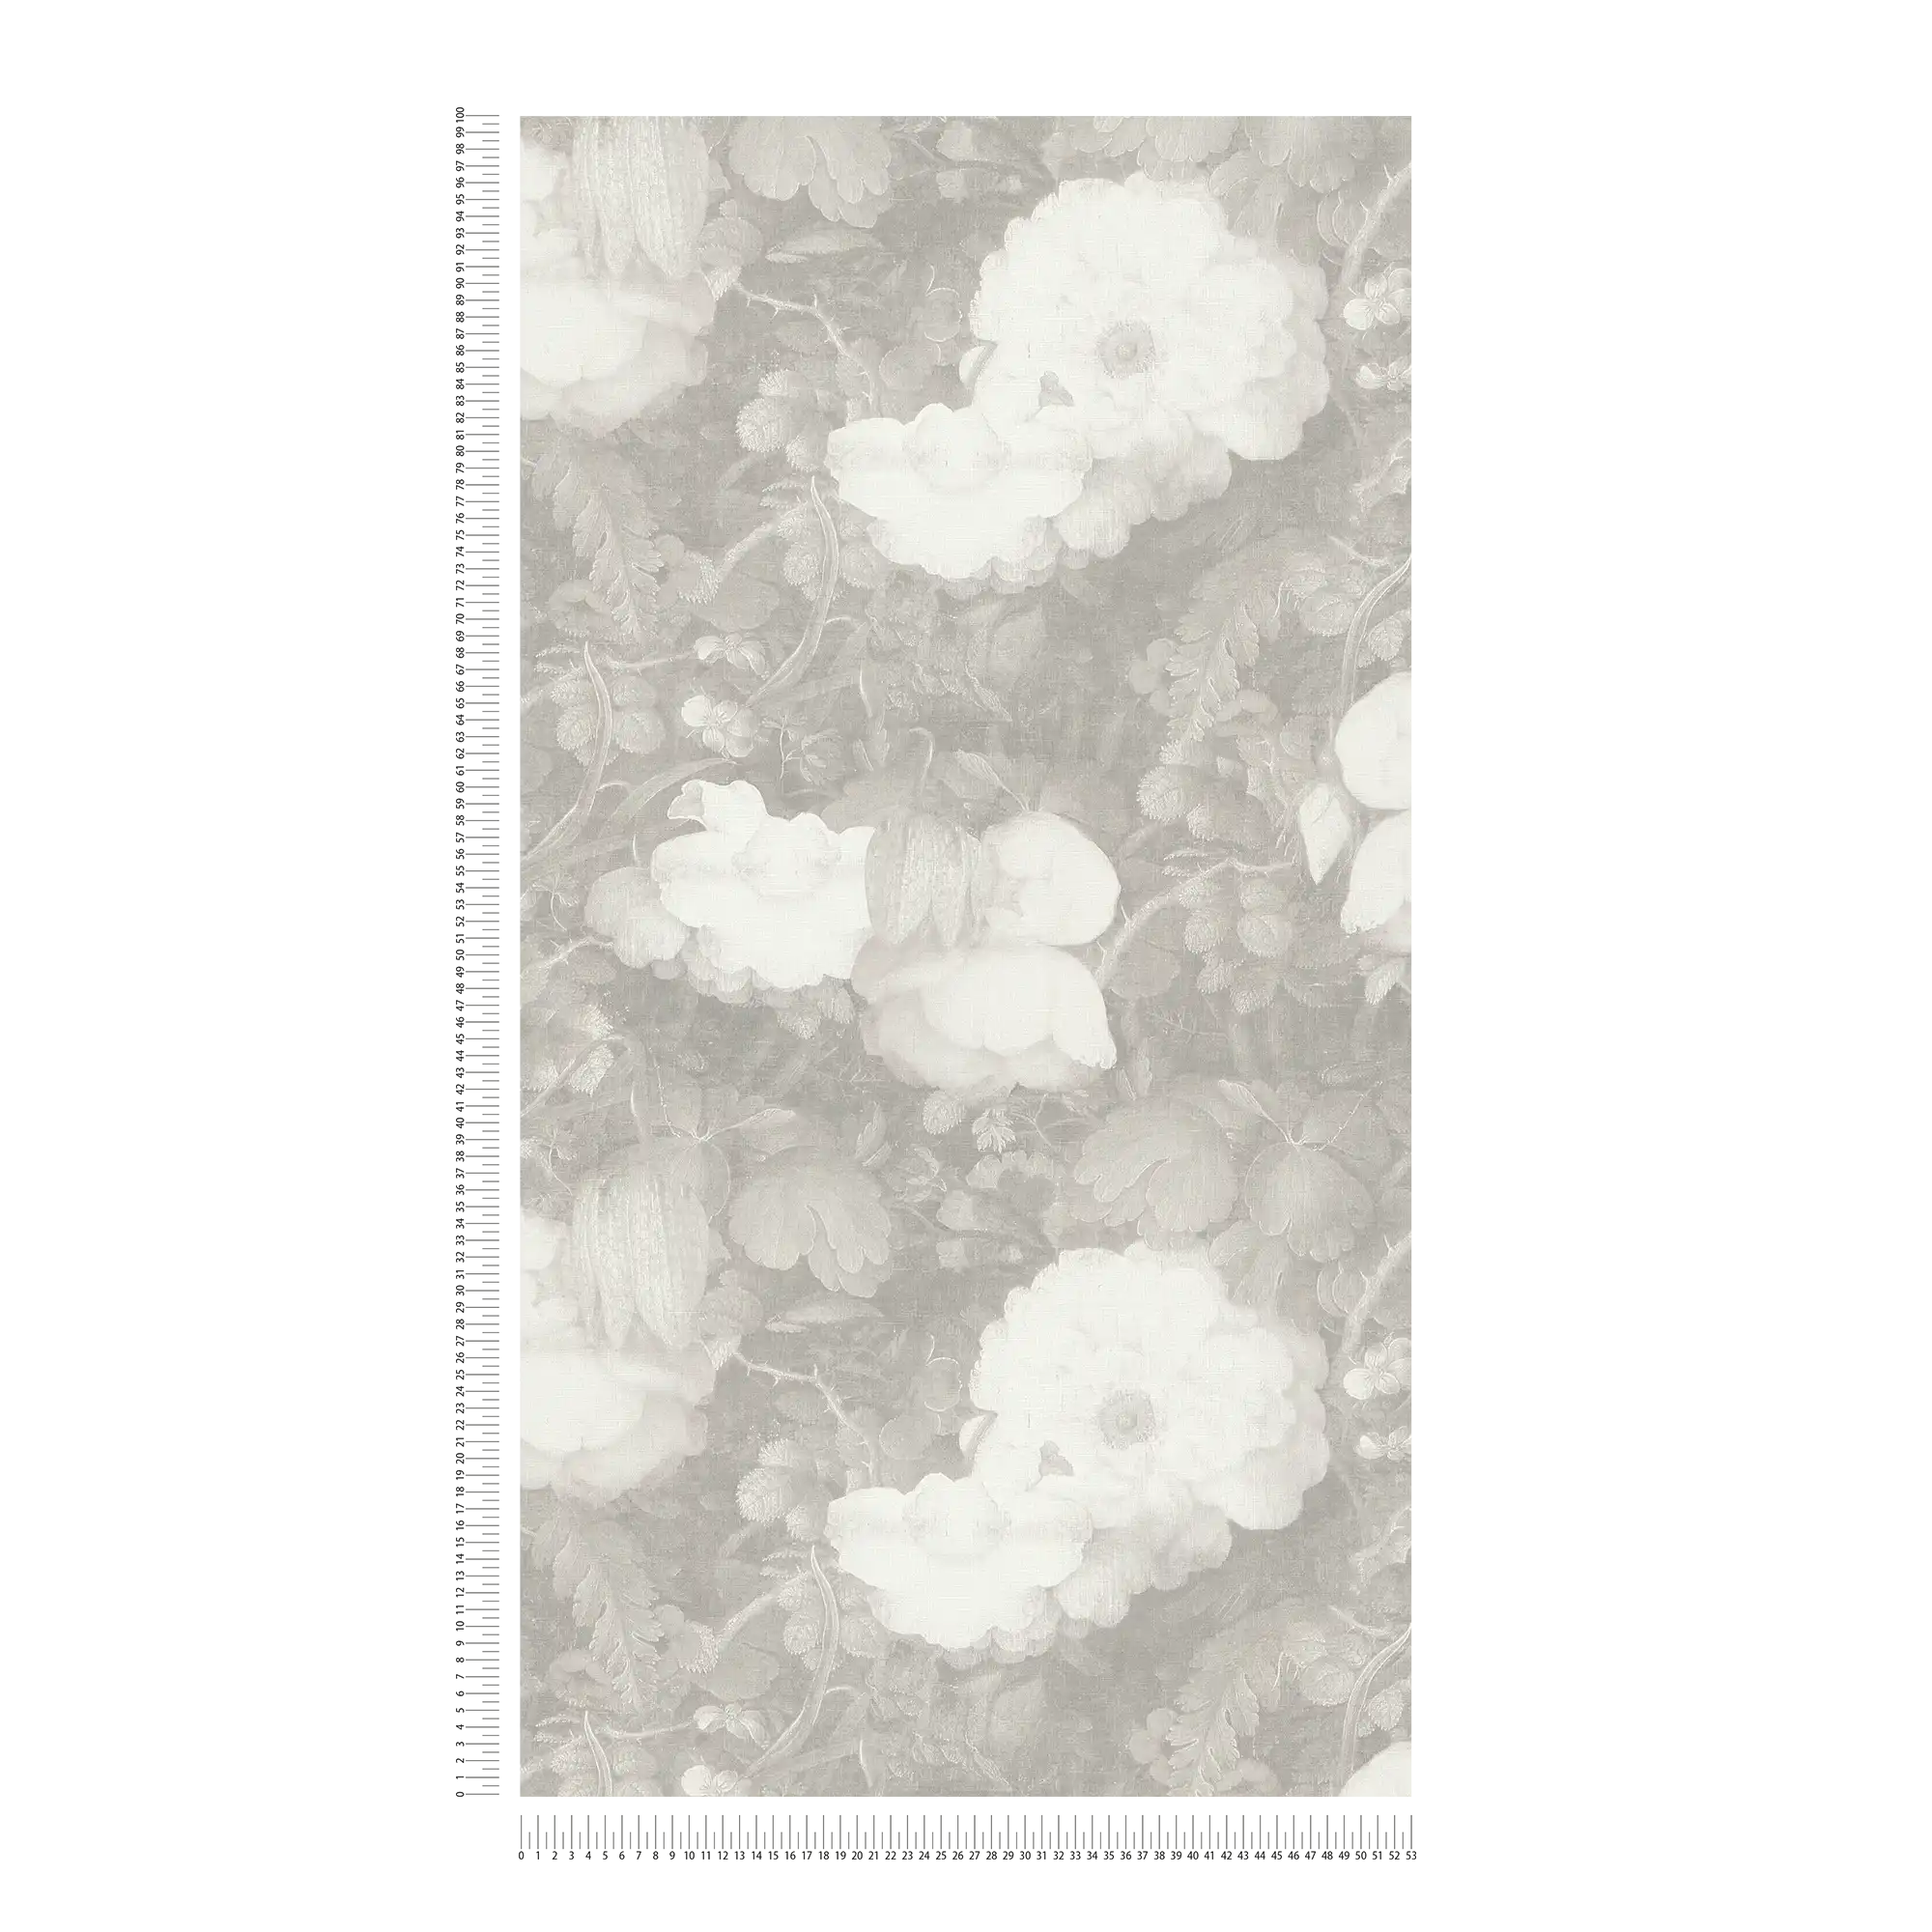             Painting style floral wallpaper, canvas look - grey, white
        